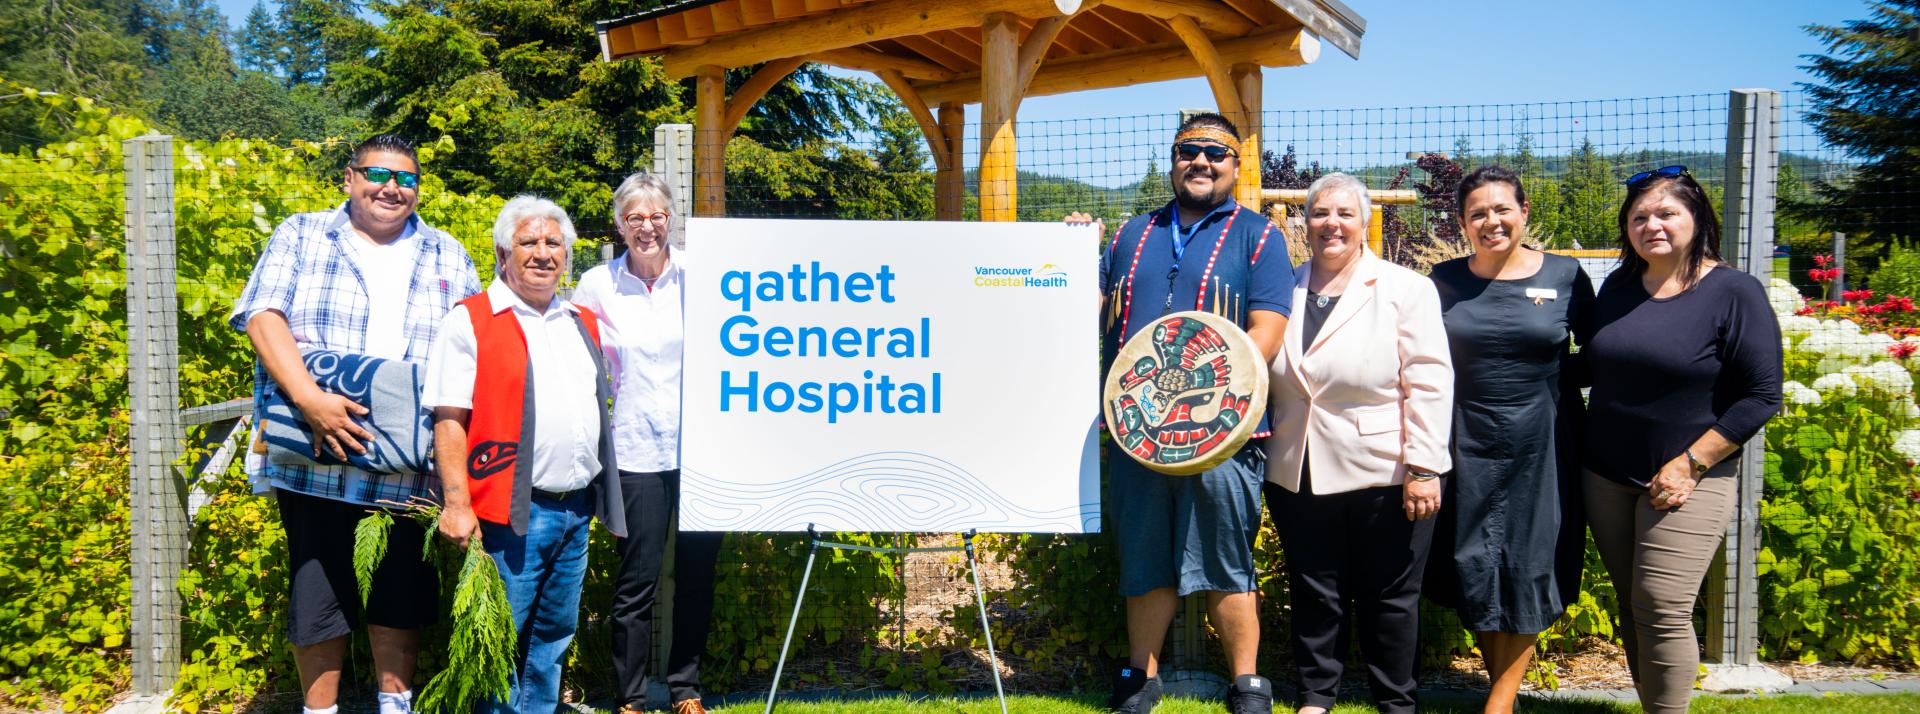 Group of people standing next to qathet General Hospital sign.